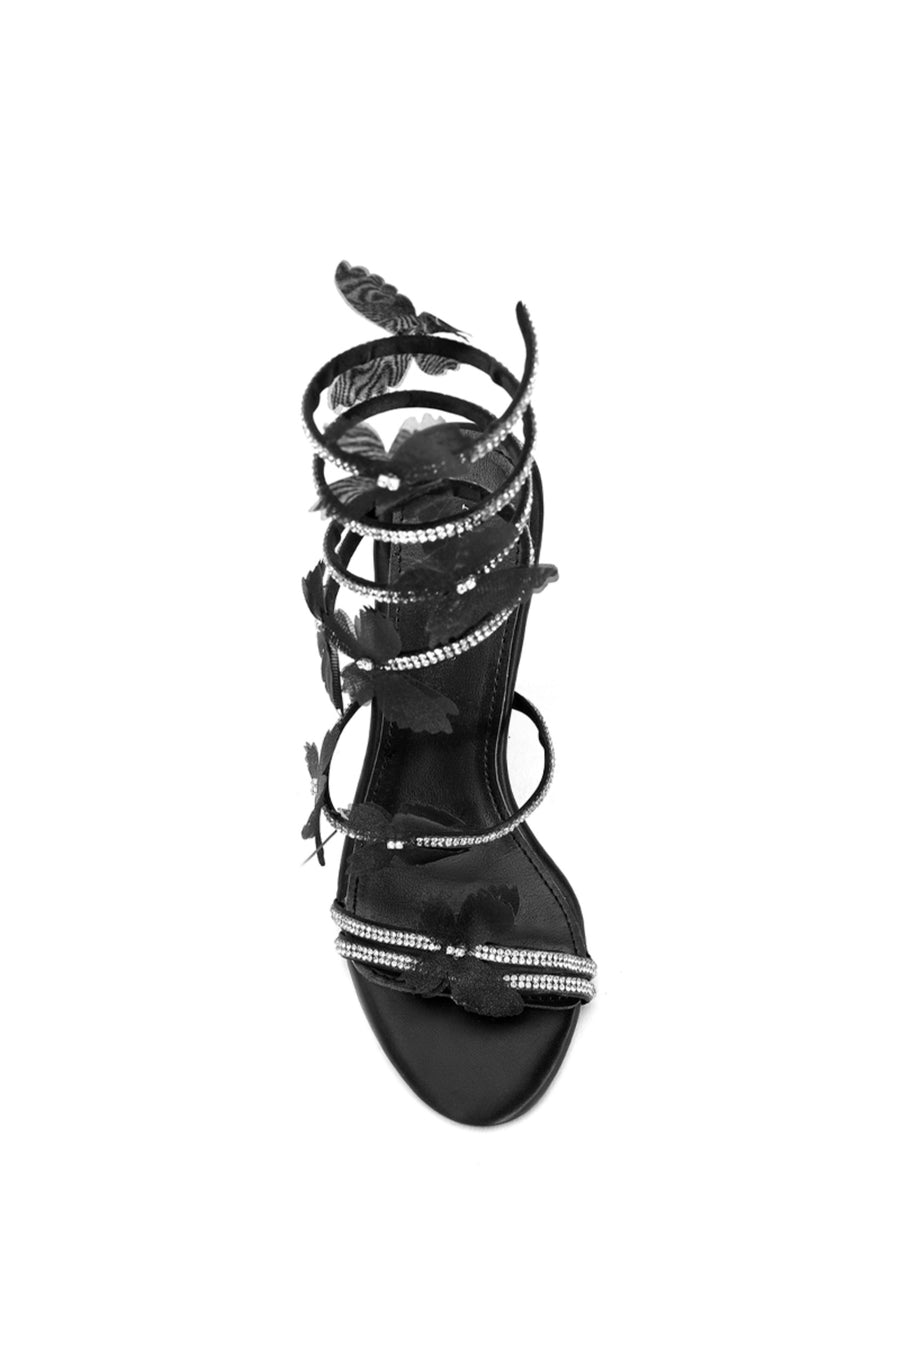 top view of Black stiletto heels with crystal embellished wrap up detail and tulle butterfly accents on the straps